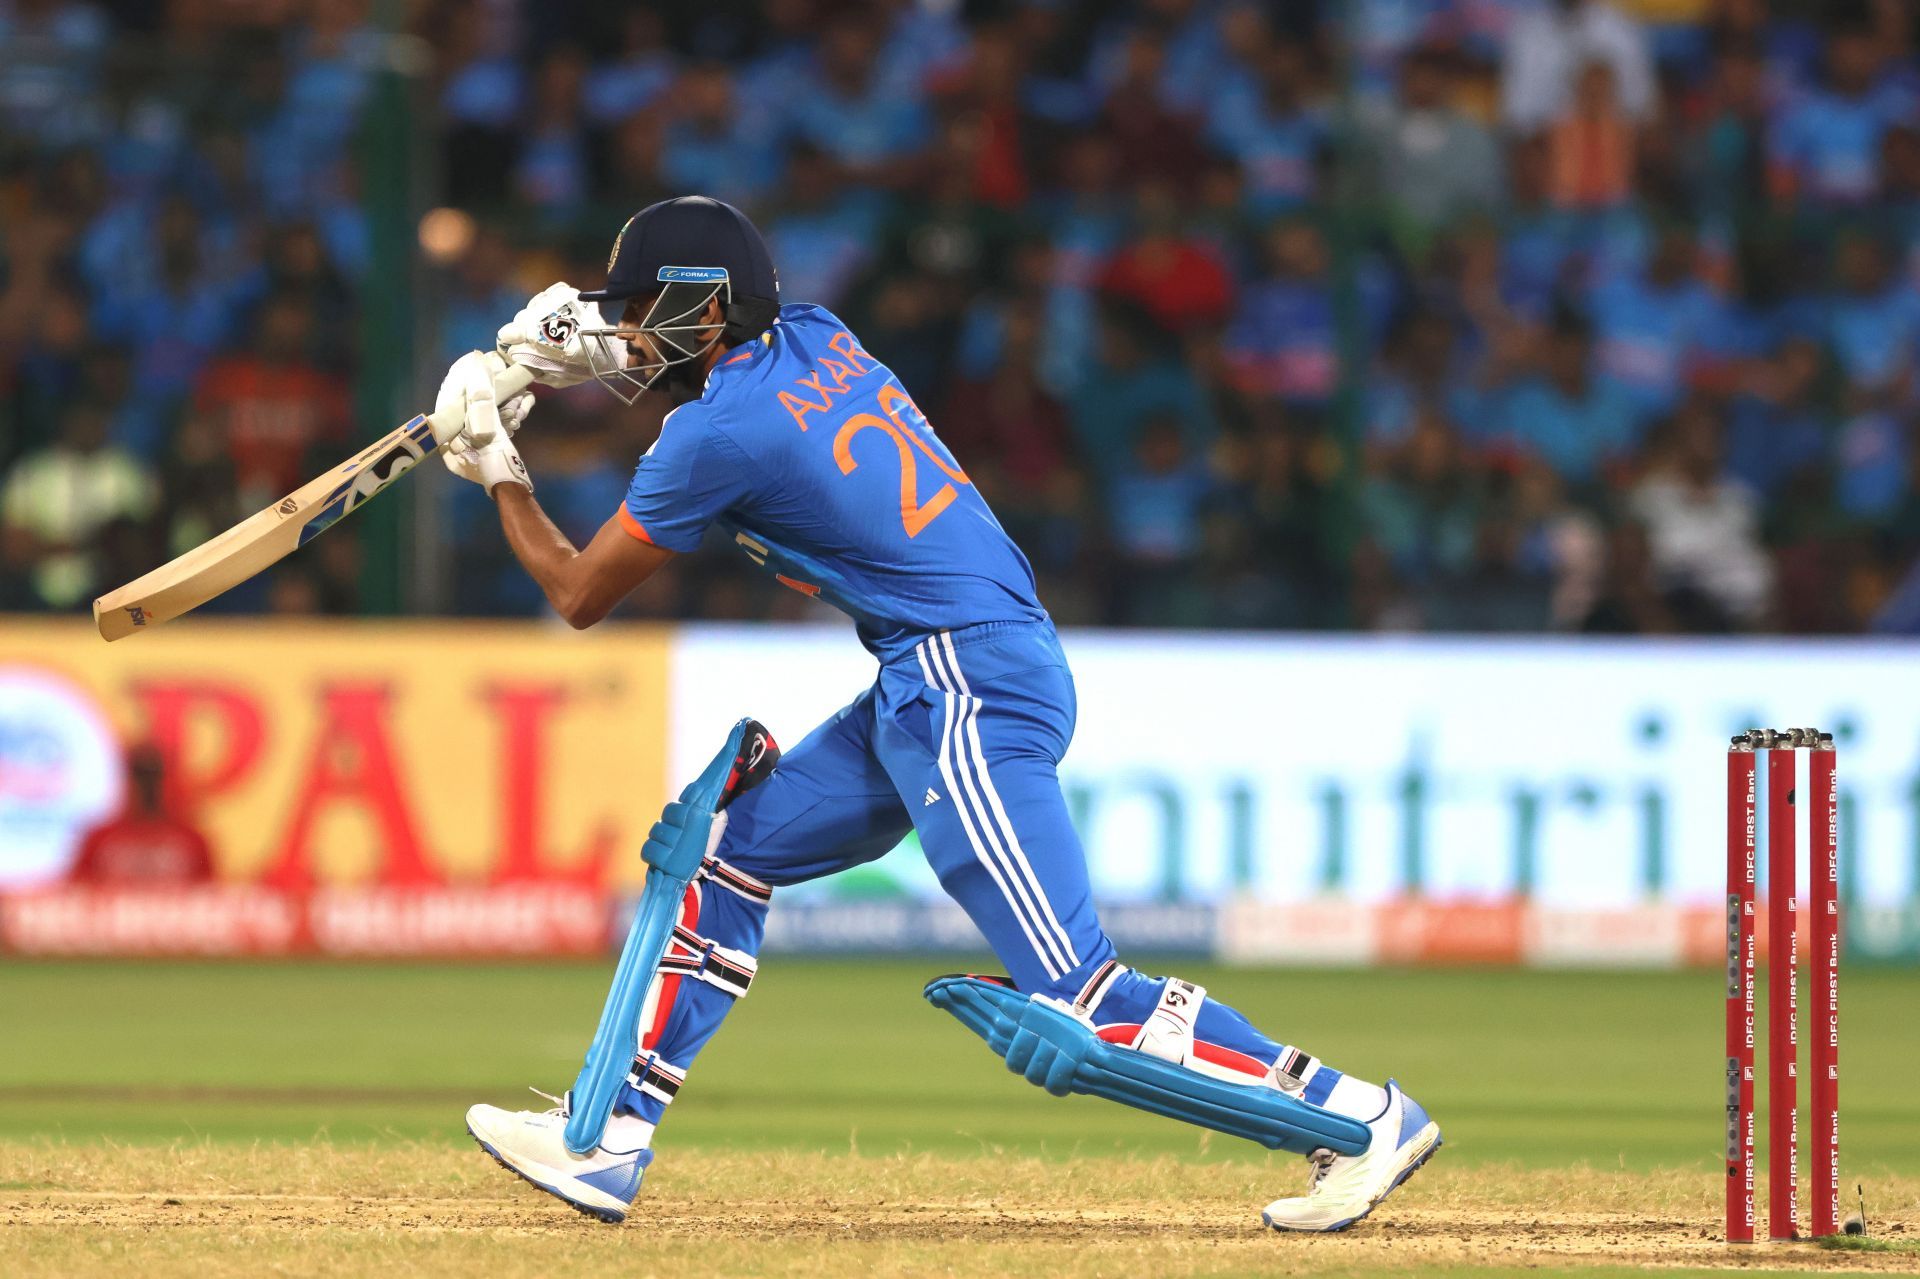 The Indian cricketer has improved his batting tremendously in recent years. (Pic: Getty Images)